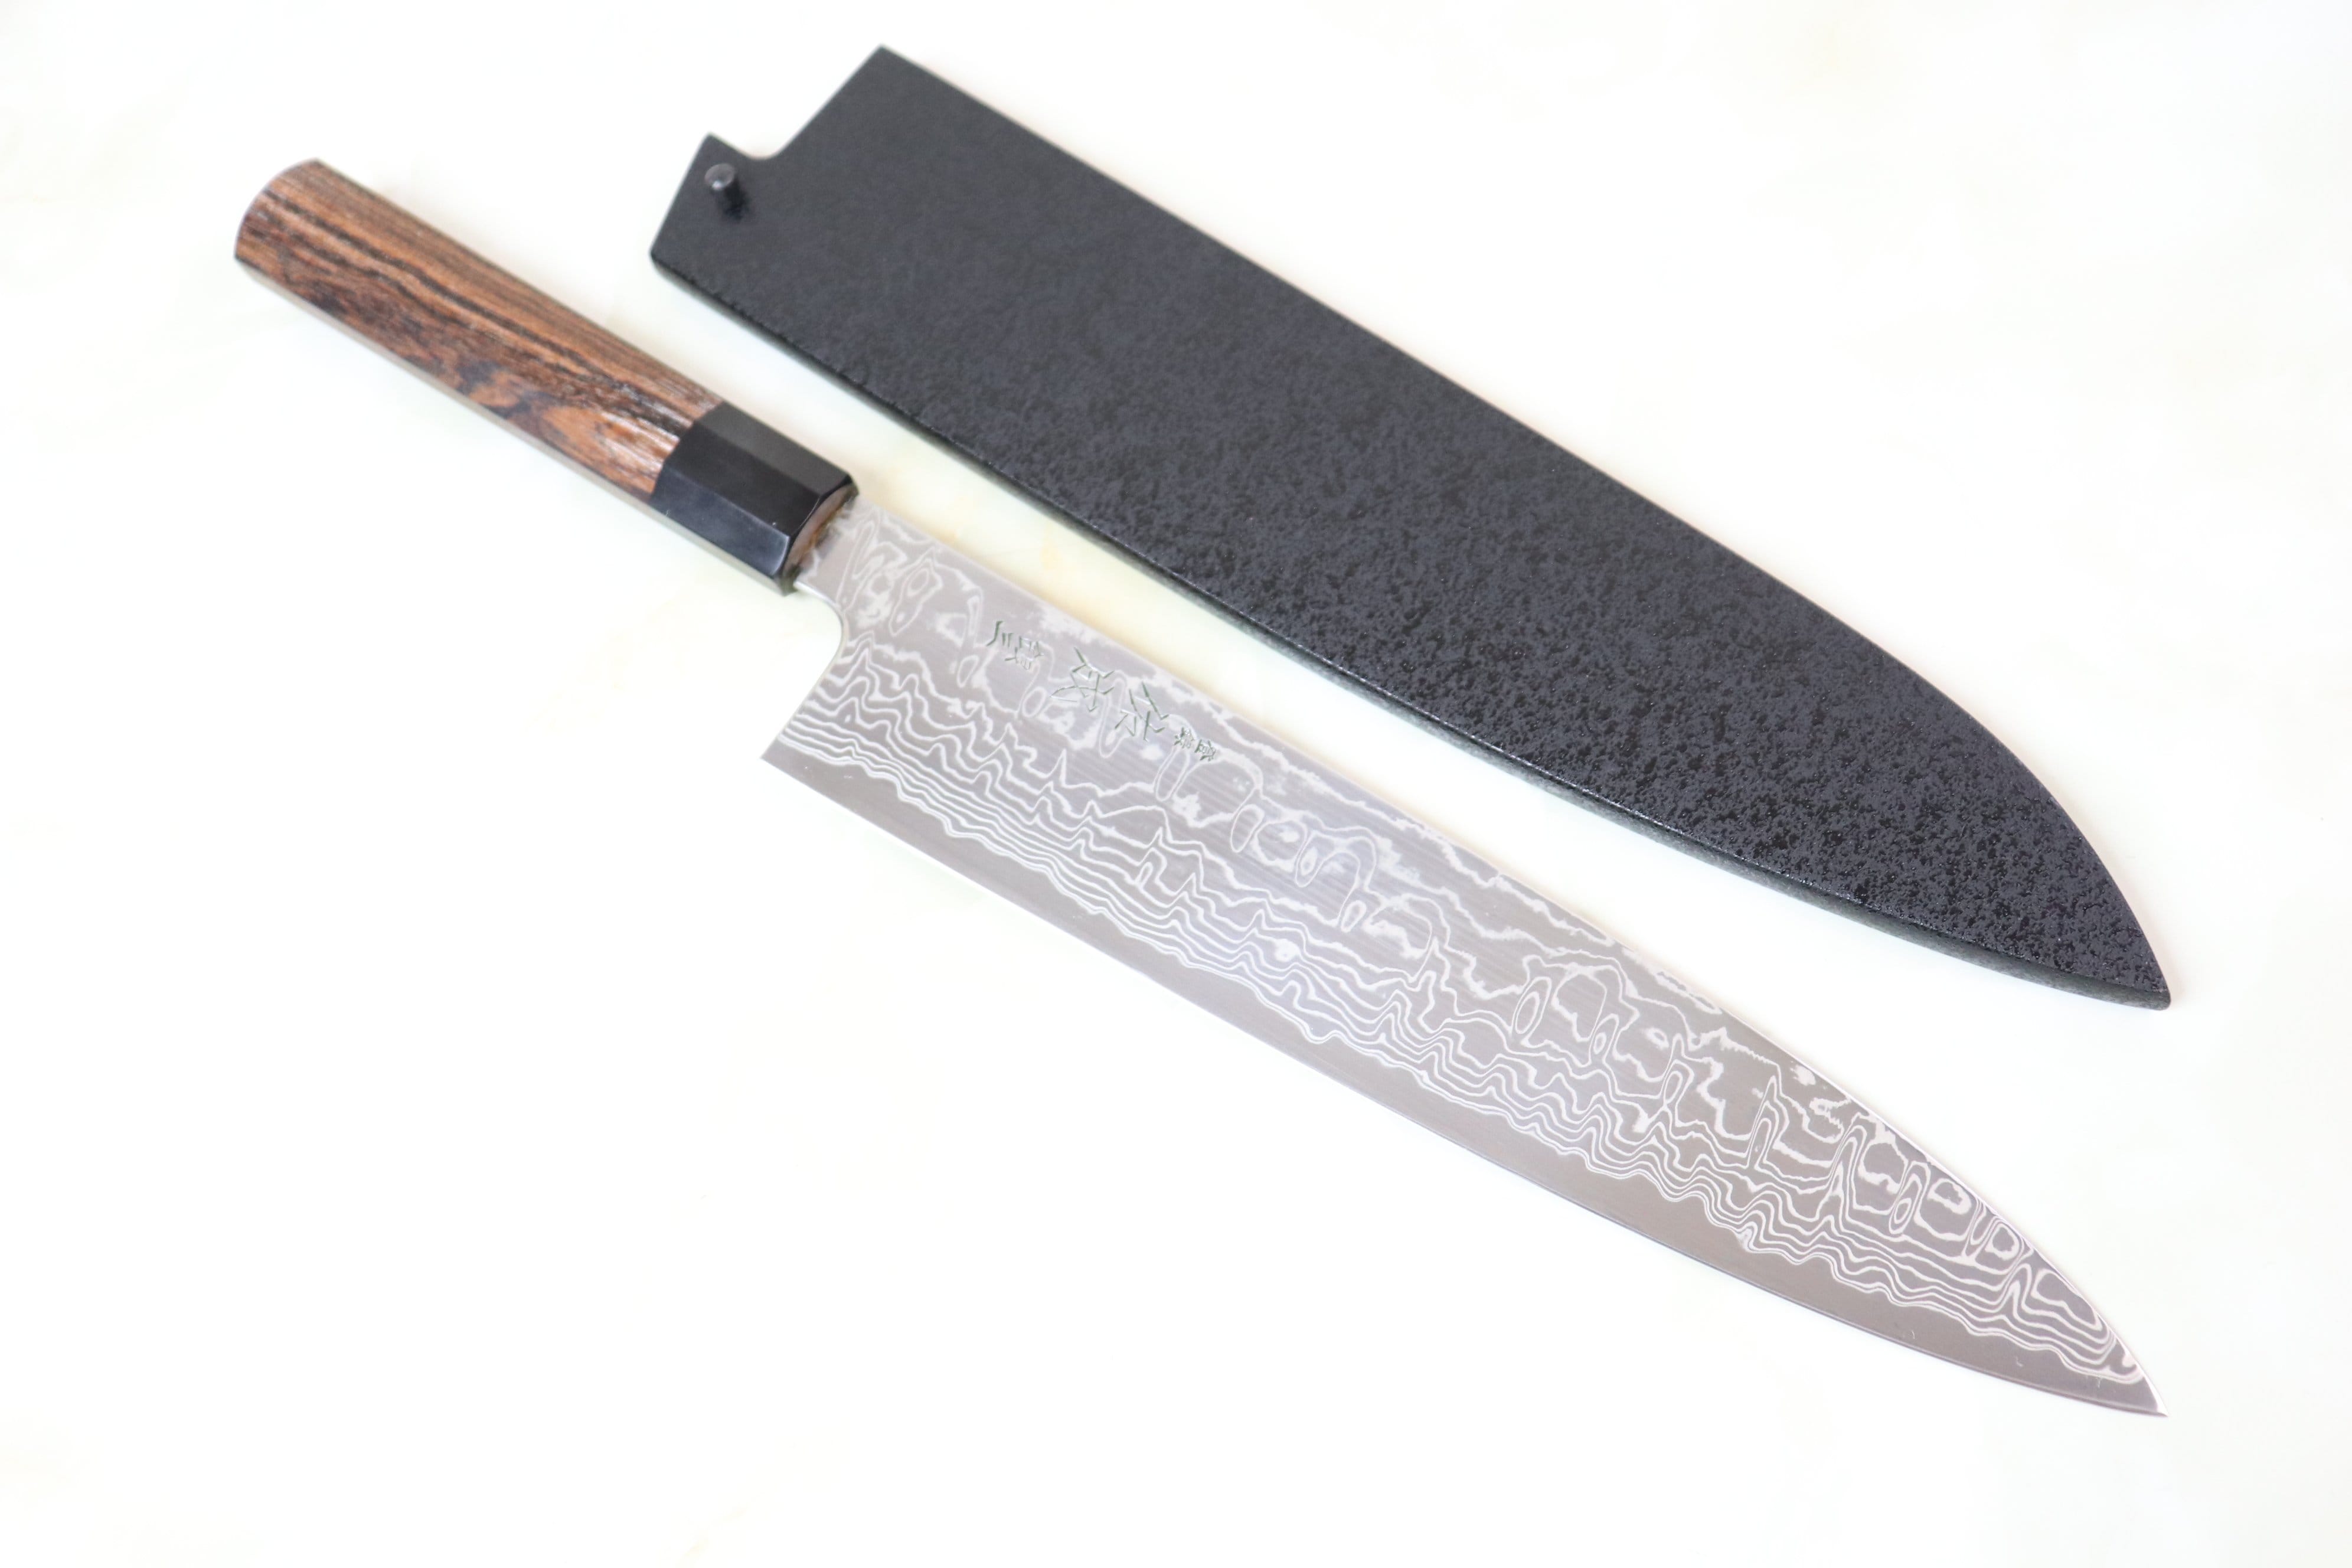 Paudin Damascus Chef's Knife - The Hungry Pinner